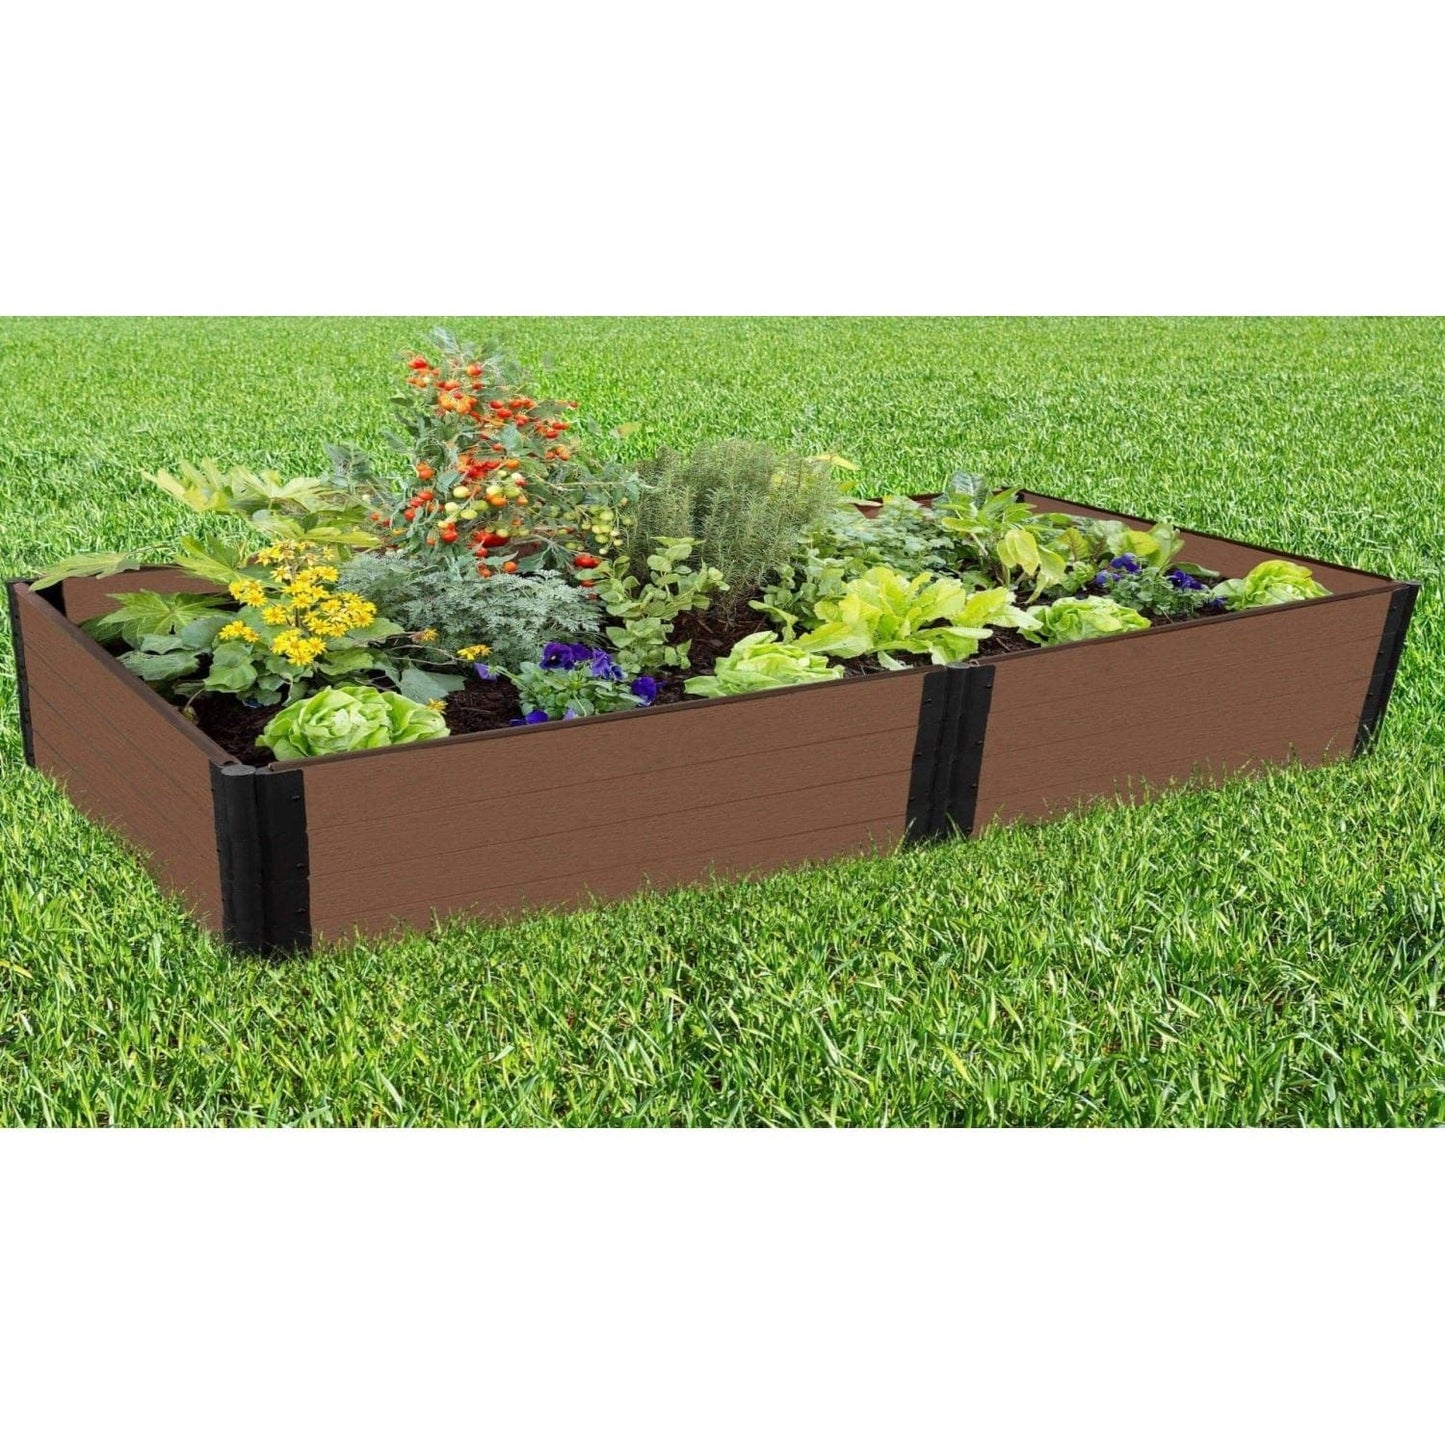 Frame It All Gardening Accessories Frame It All | Uptown Brown Raised Garden Bed 4' X 8' X 22" - 1 " Profile 4 Level 300001441